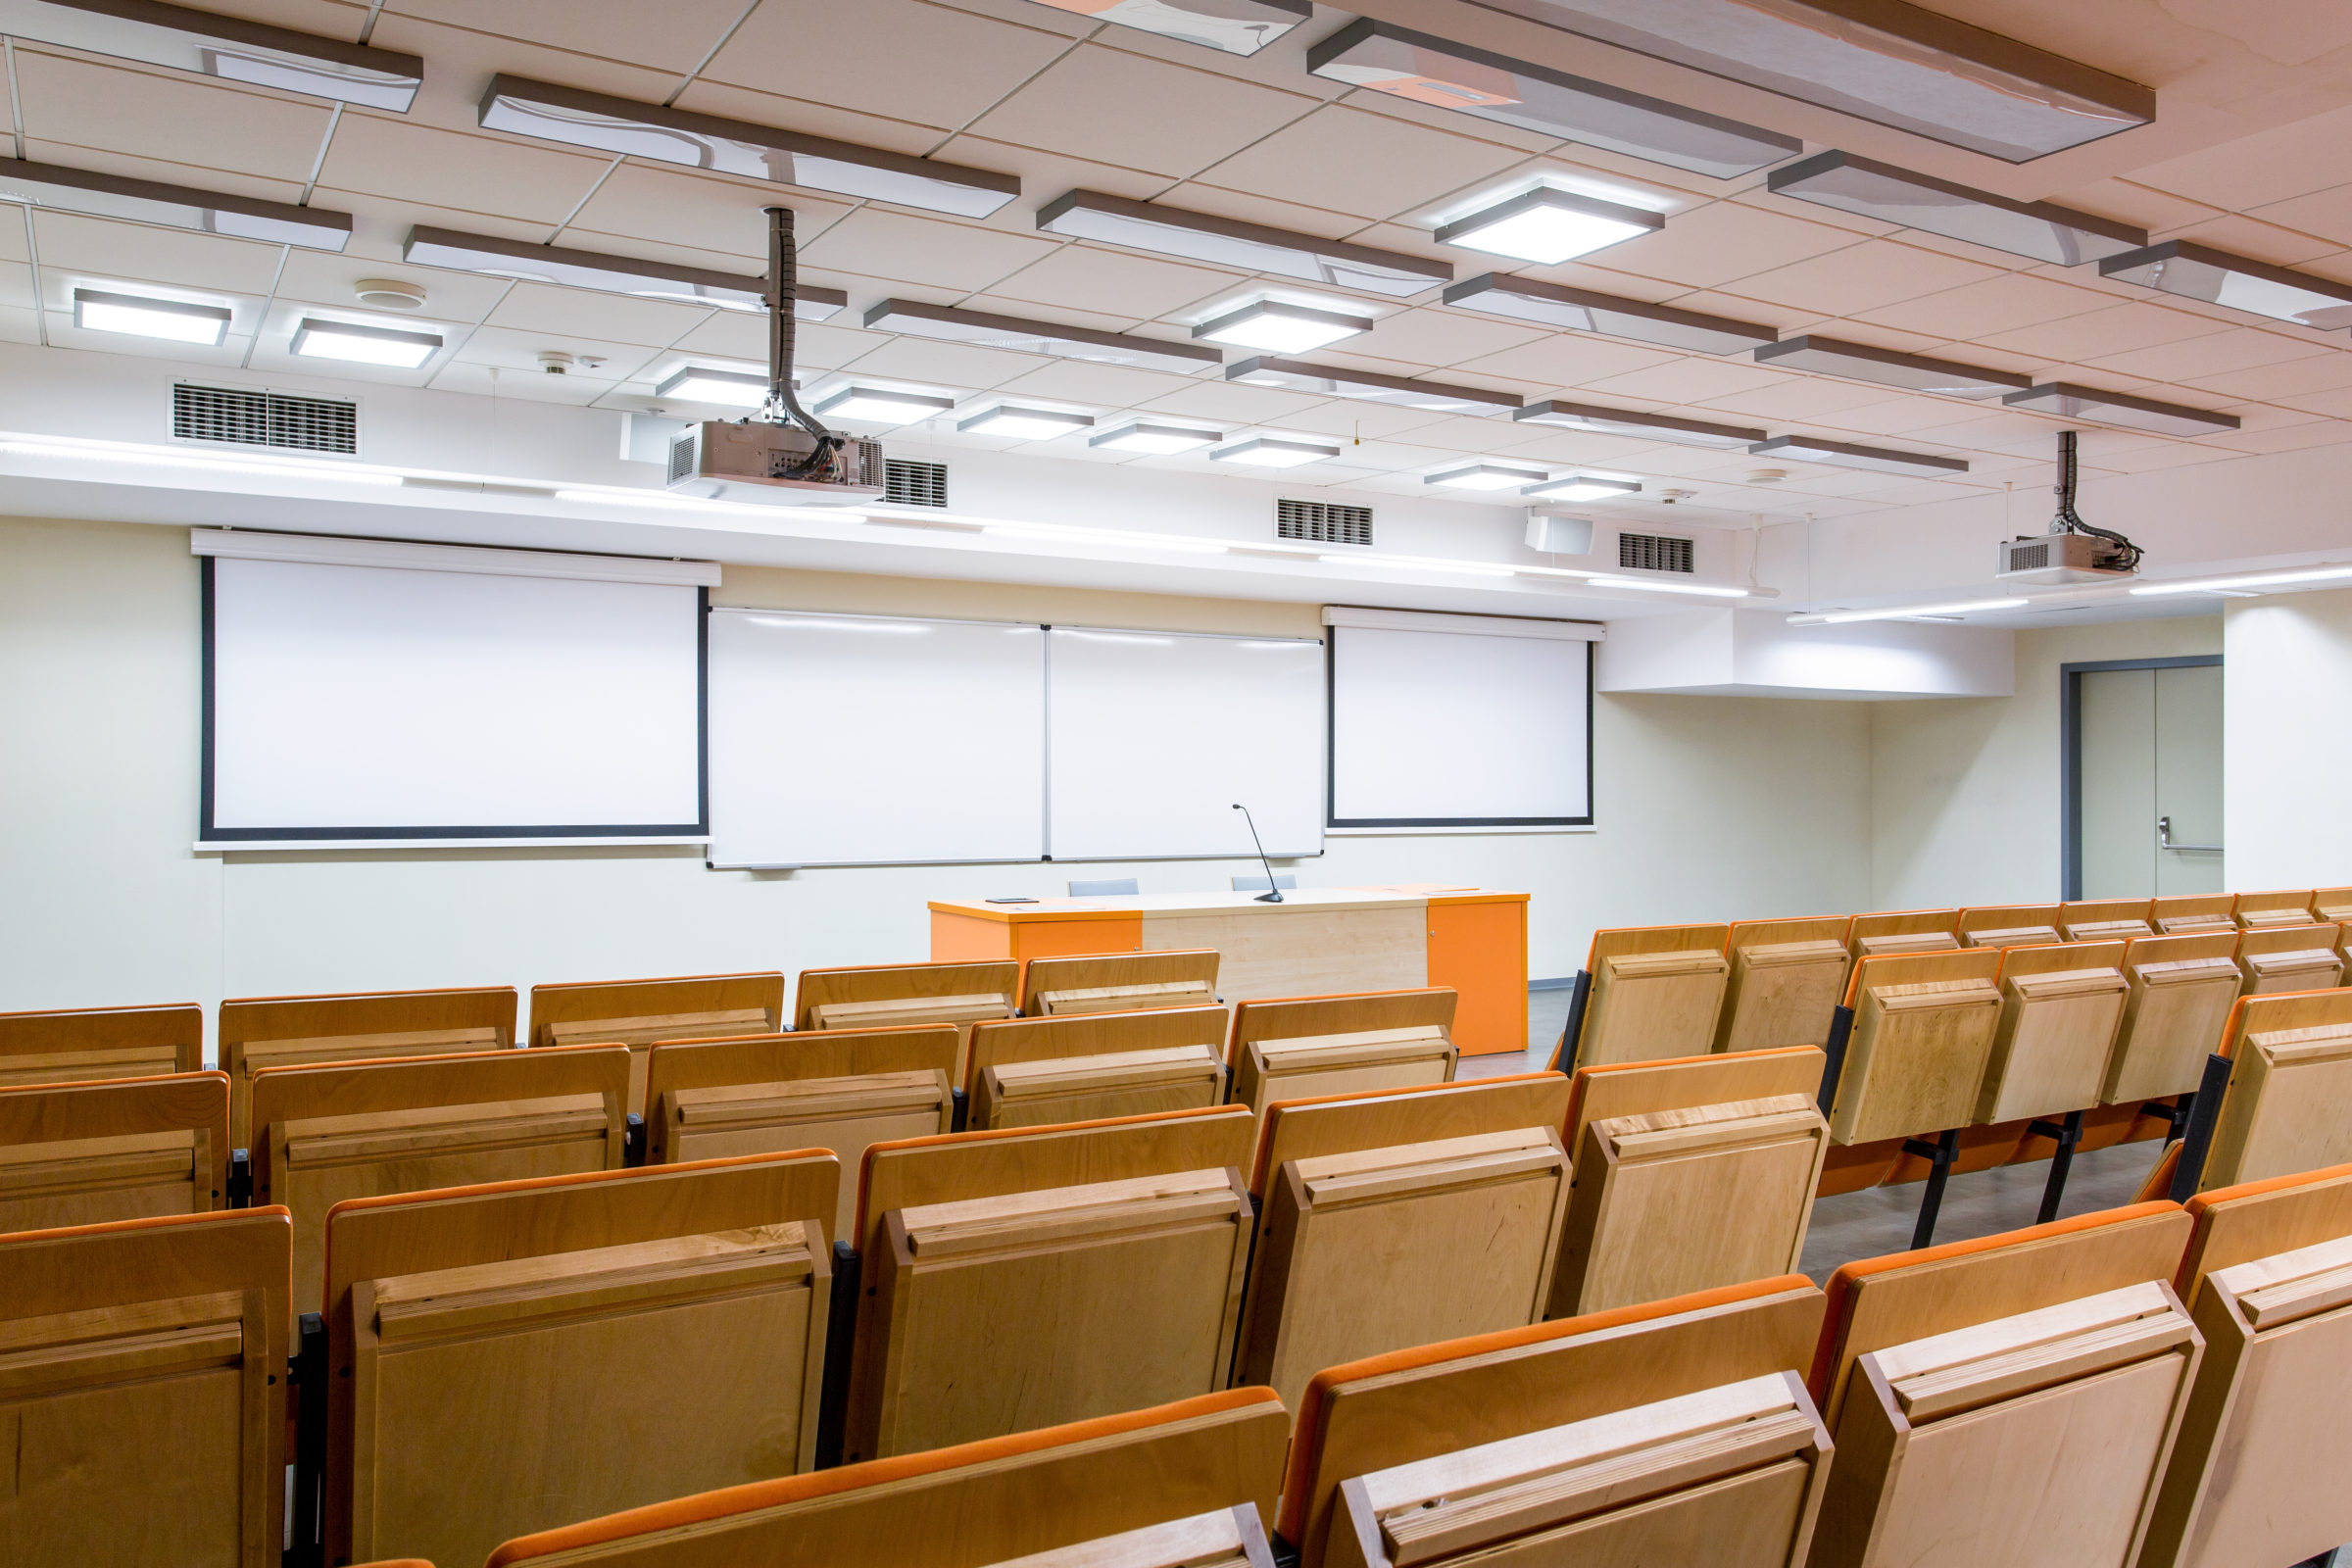 Auditorium where bright minds are studying